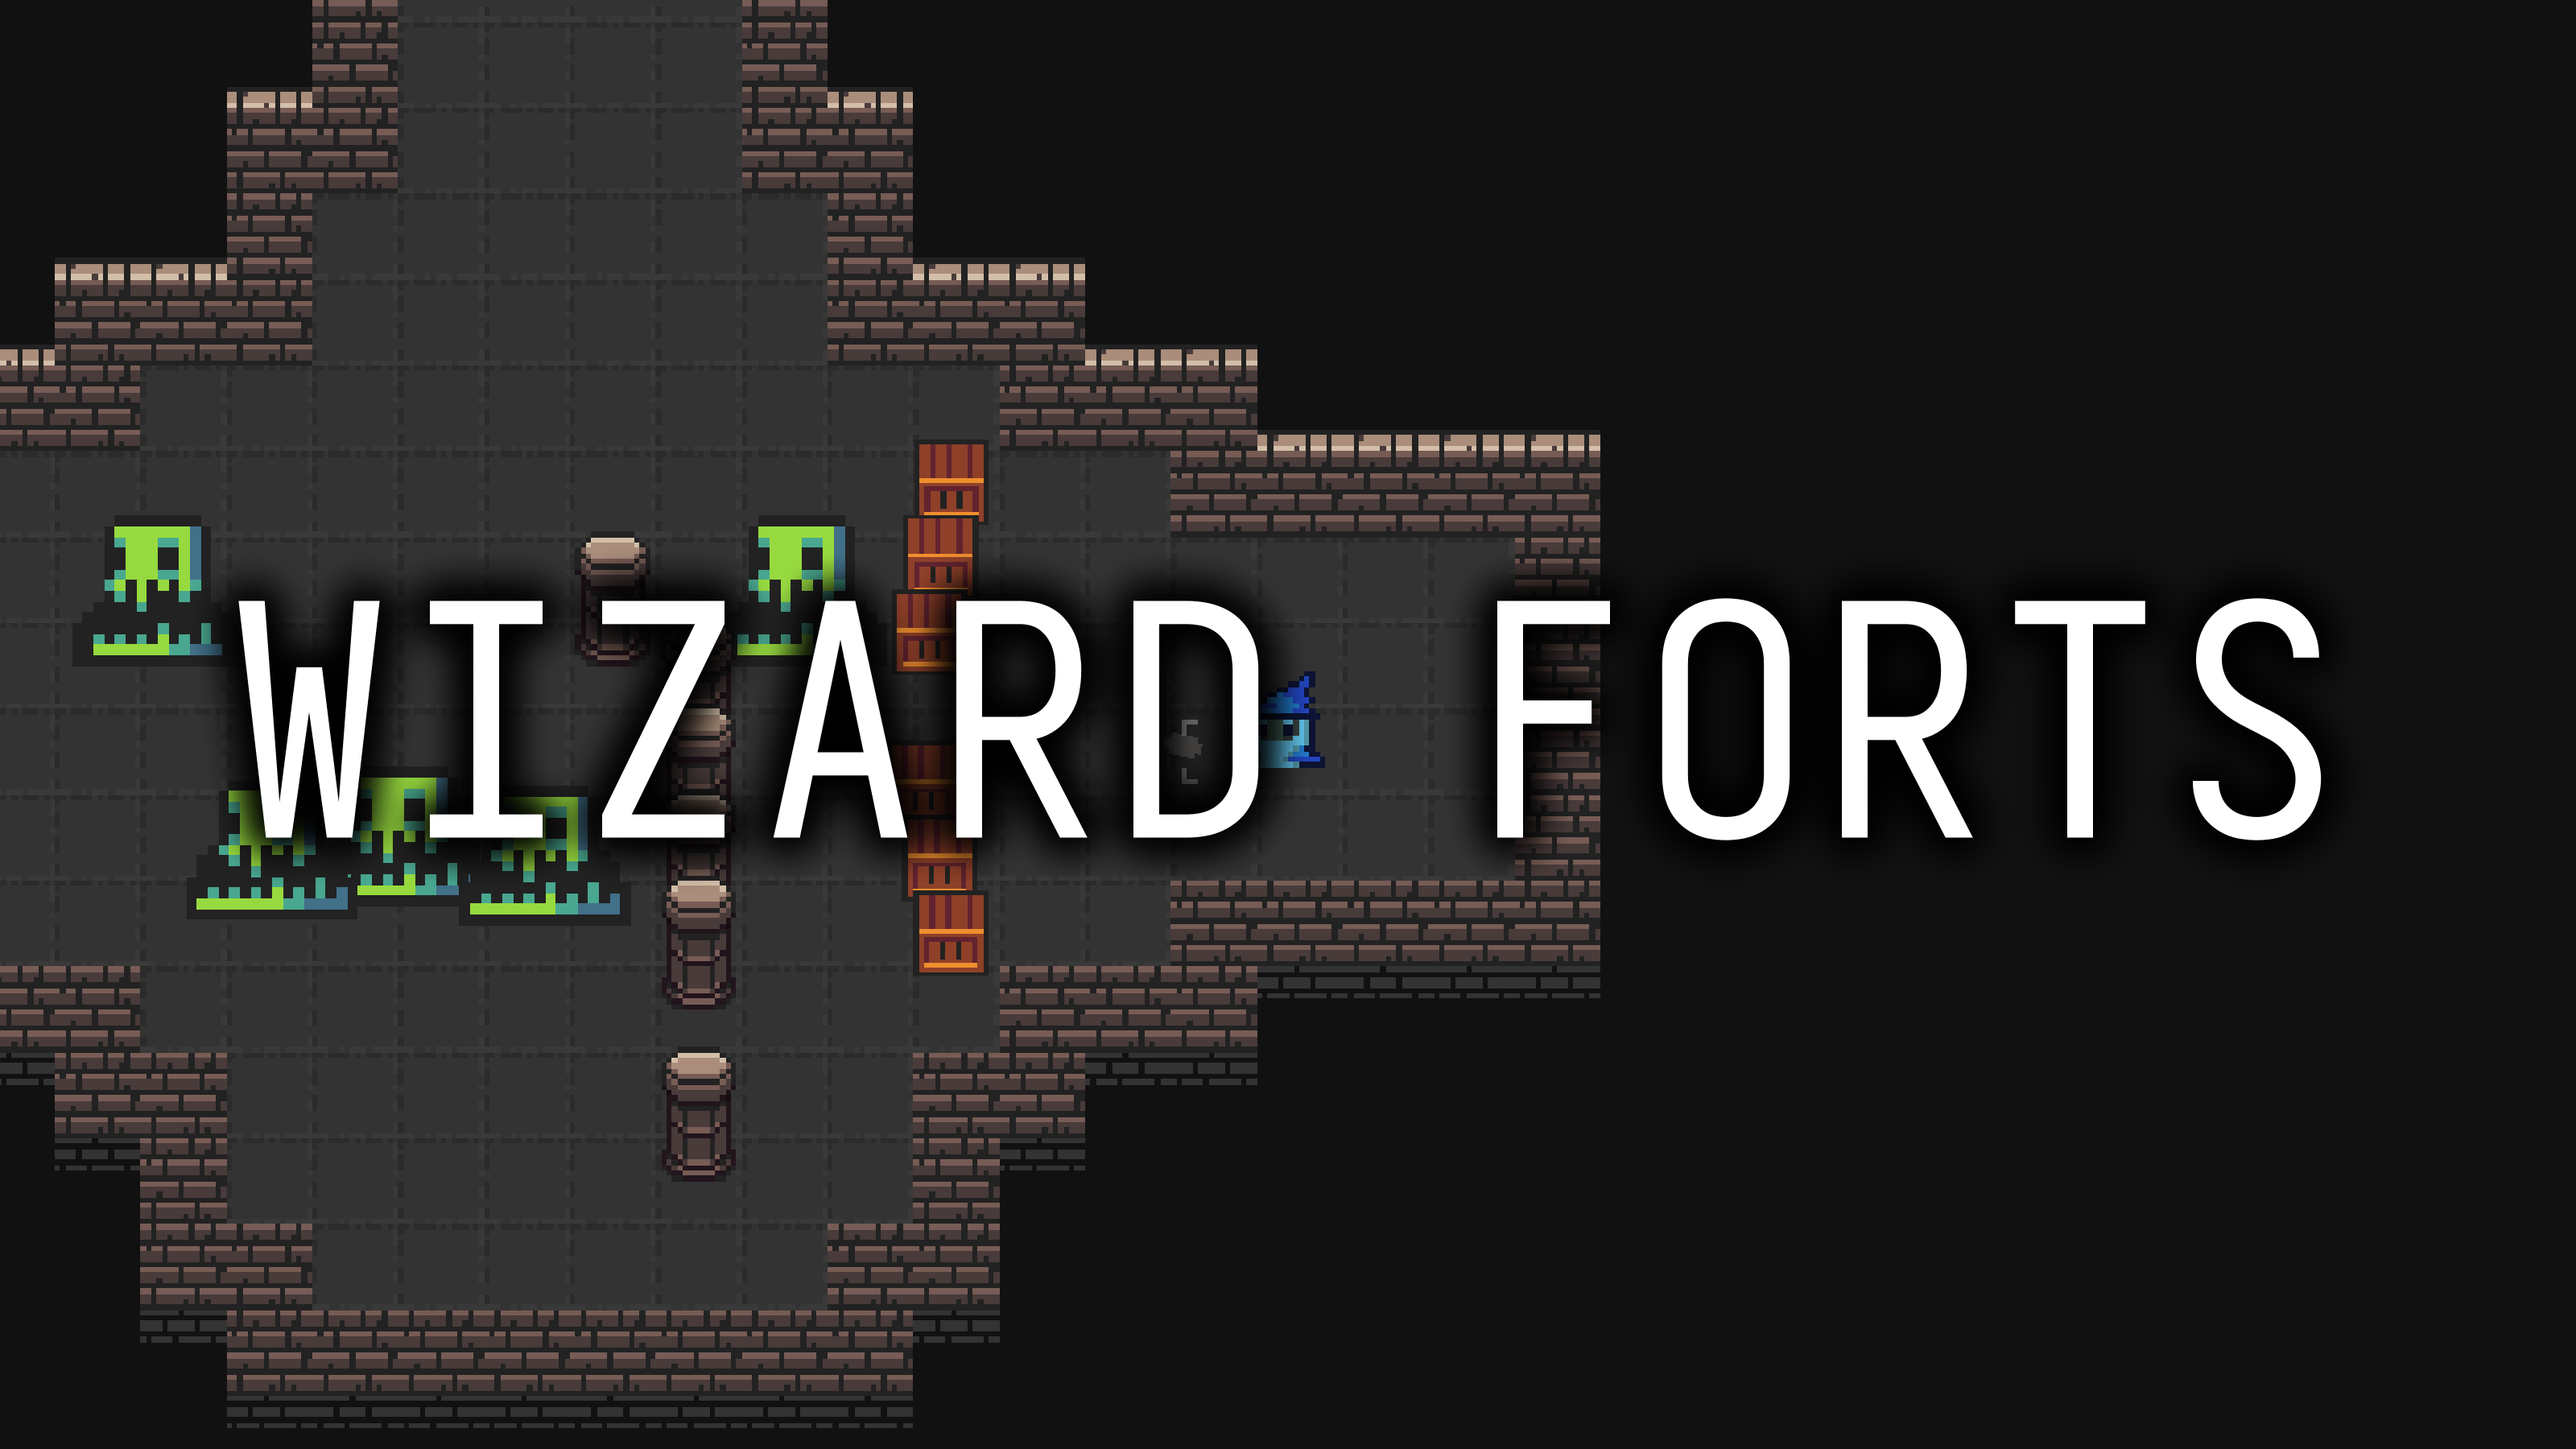 Wizard Forts